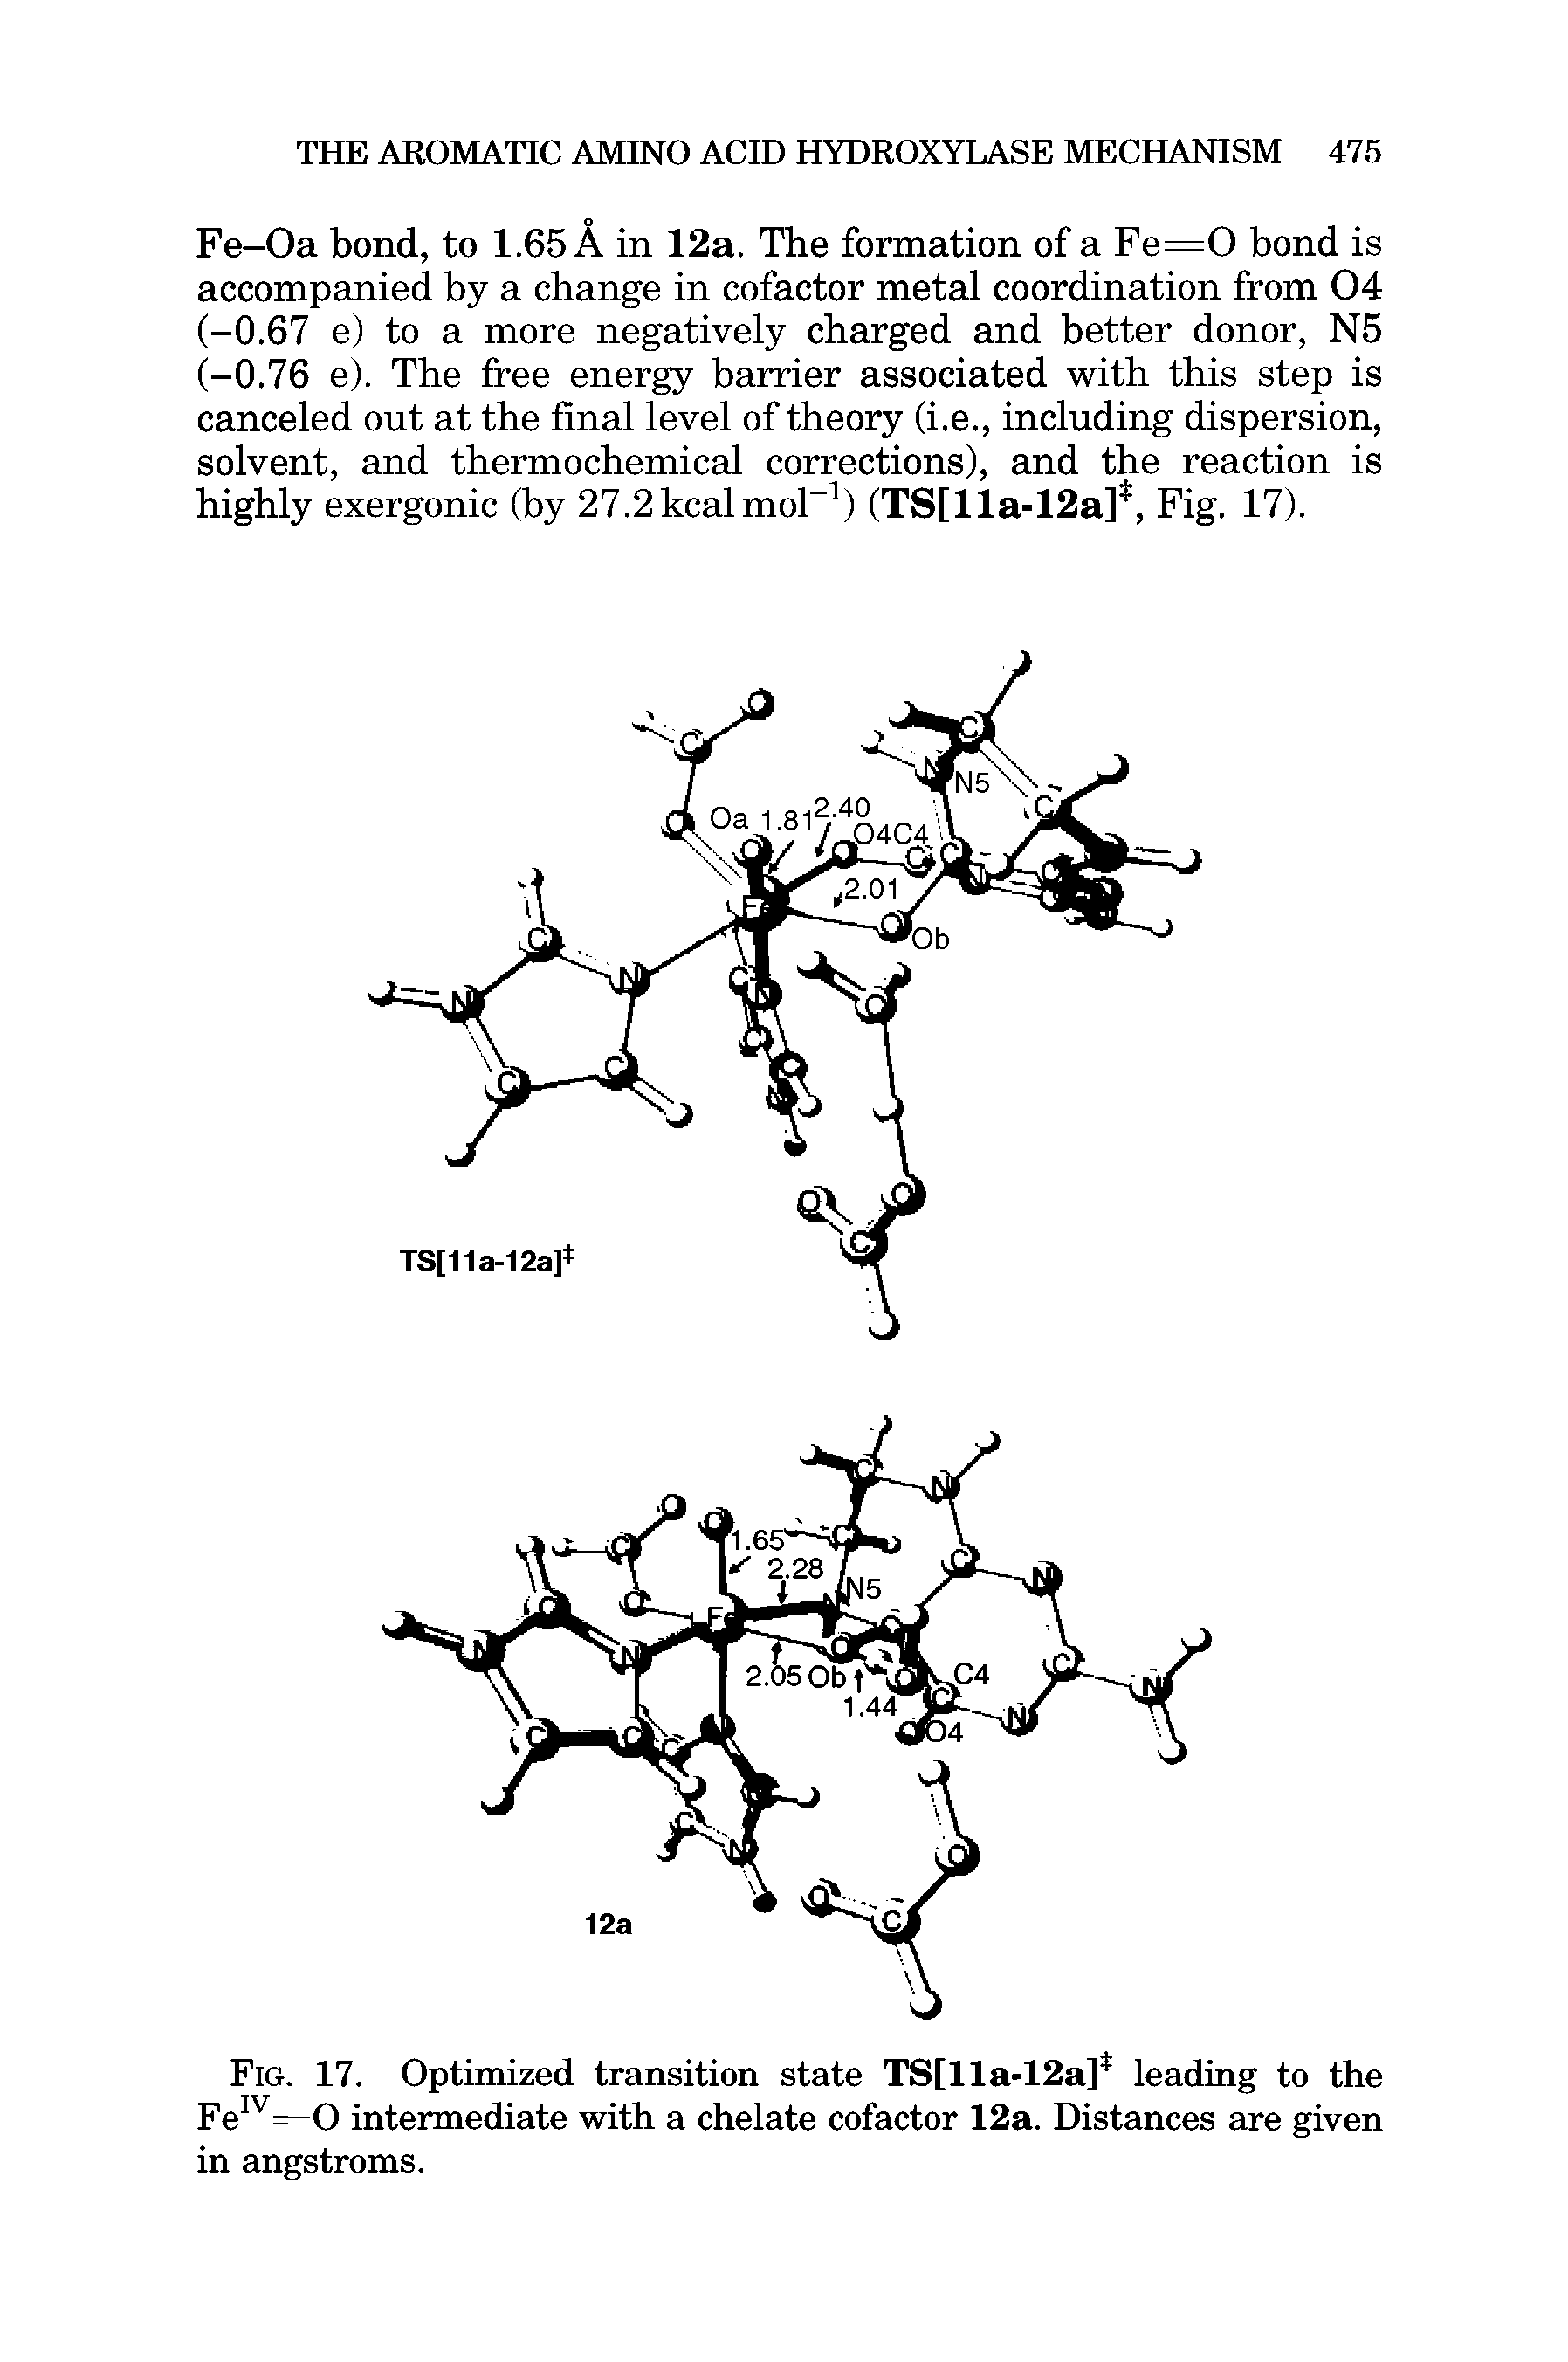 Fig. 17. Optimized transition state 8[11 -12 ] leading to the FeIV=0 intermediate with a chelate cofactor 12a. Distances are given in angstroms.